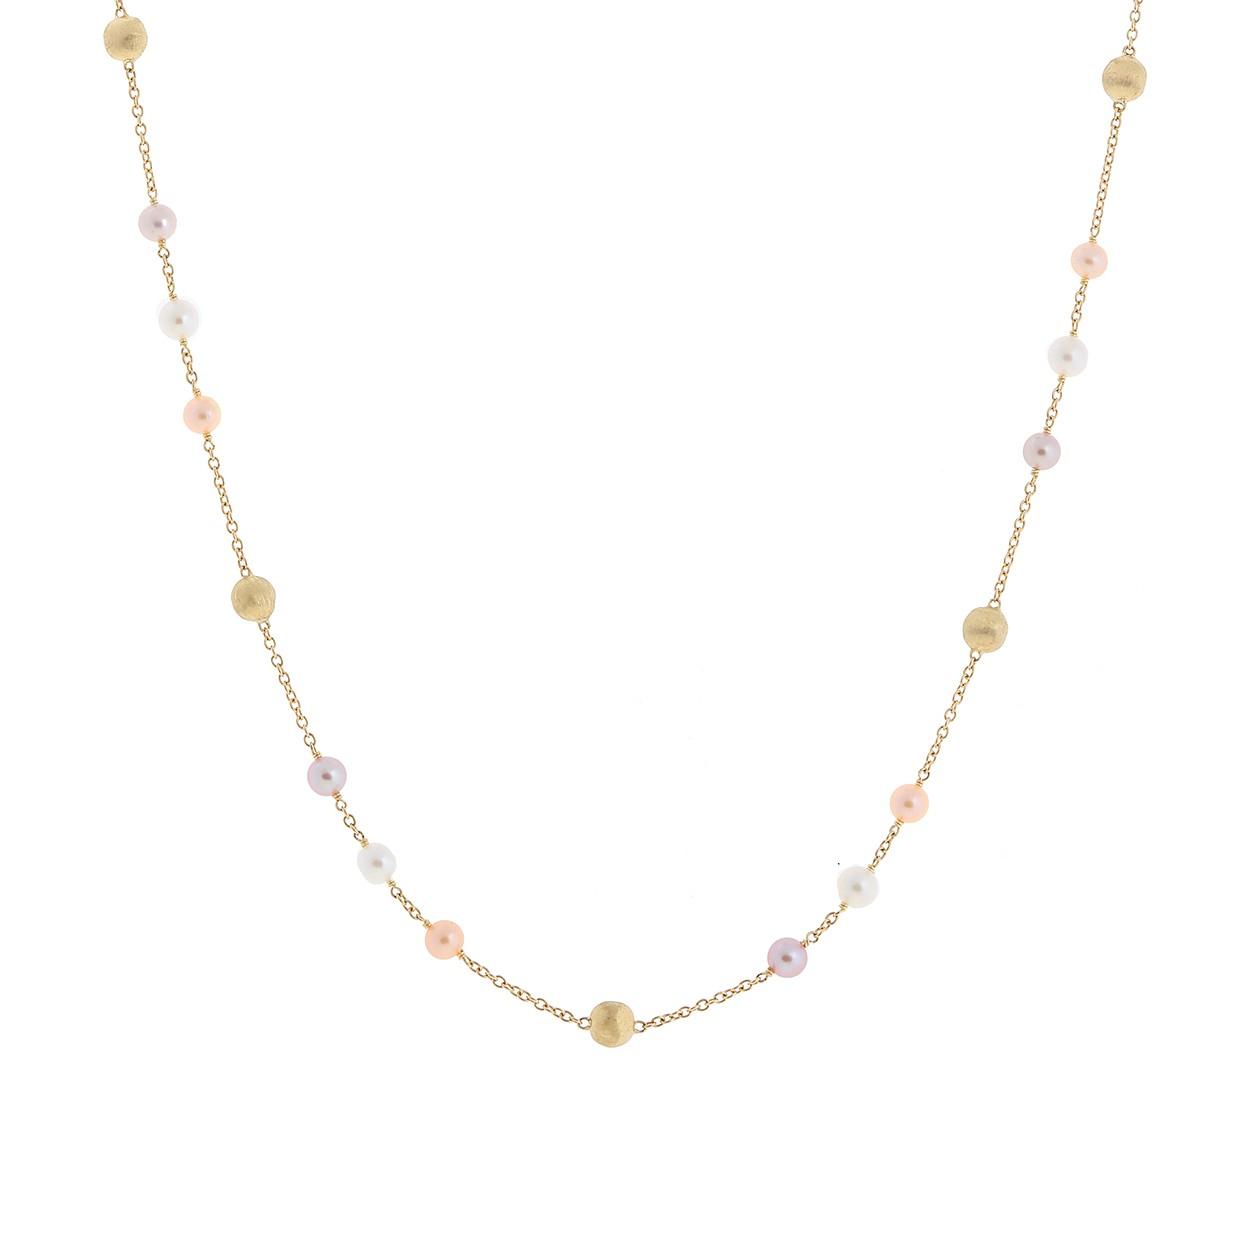 Marco Bicego Africa Yellow Gold & Multi-Colored Pearl Station Necklace